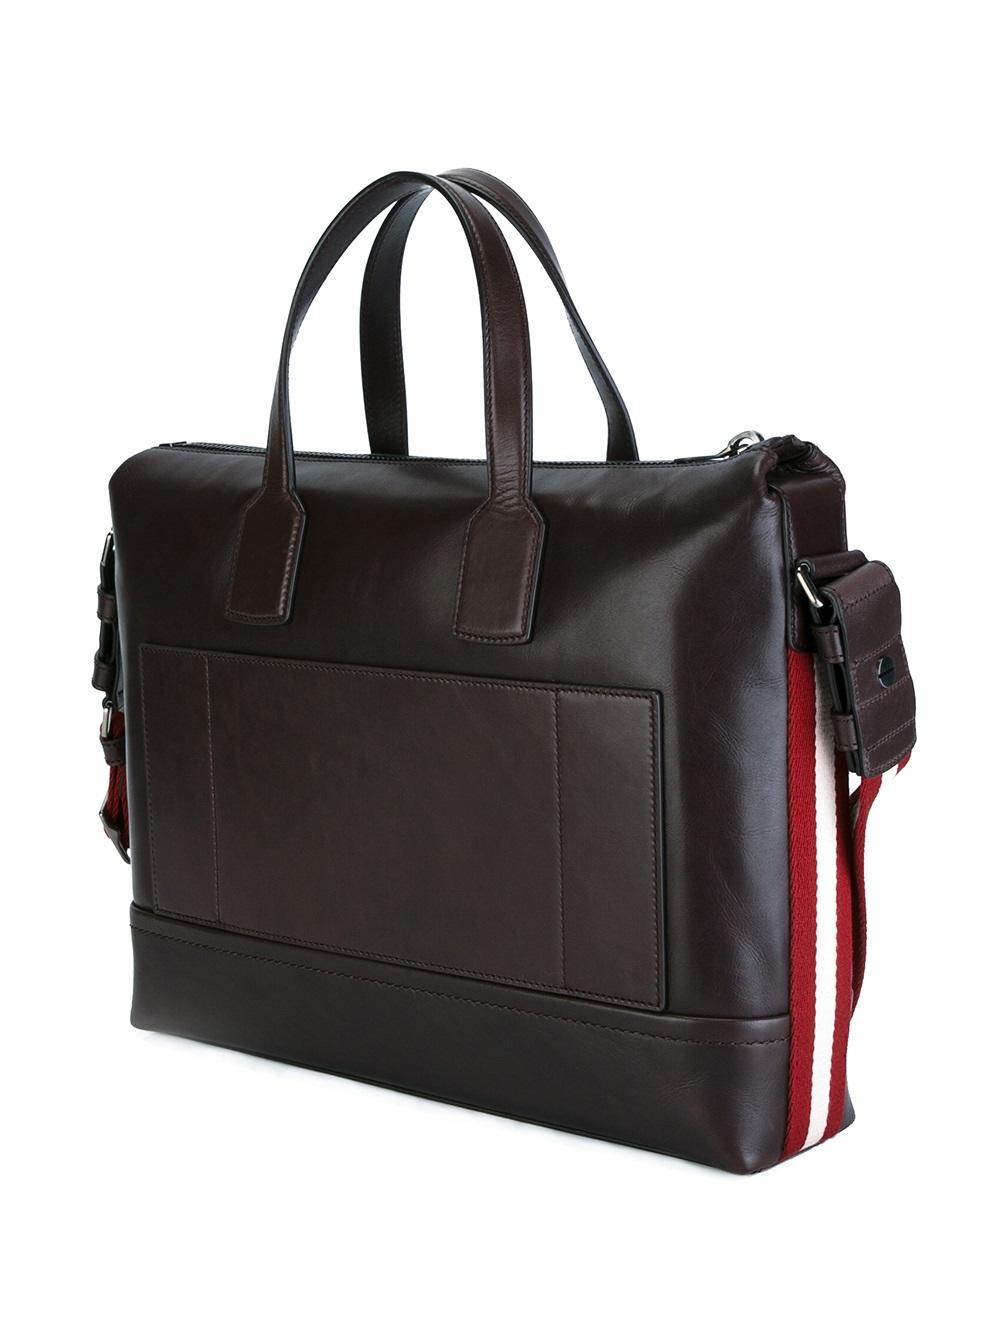 Lyst - Bally Tammi Briefcase in Brown for Men